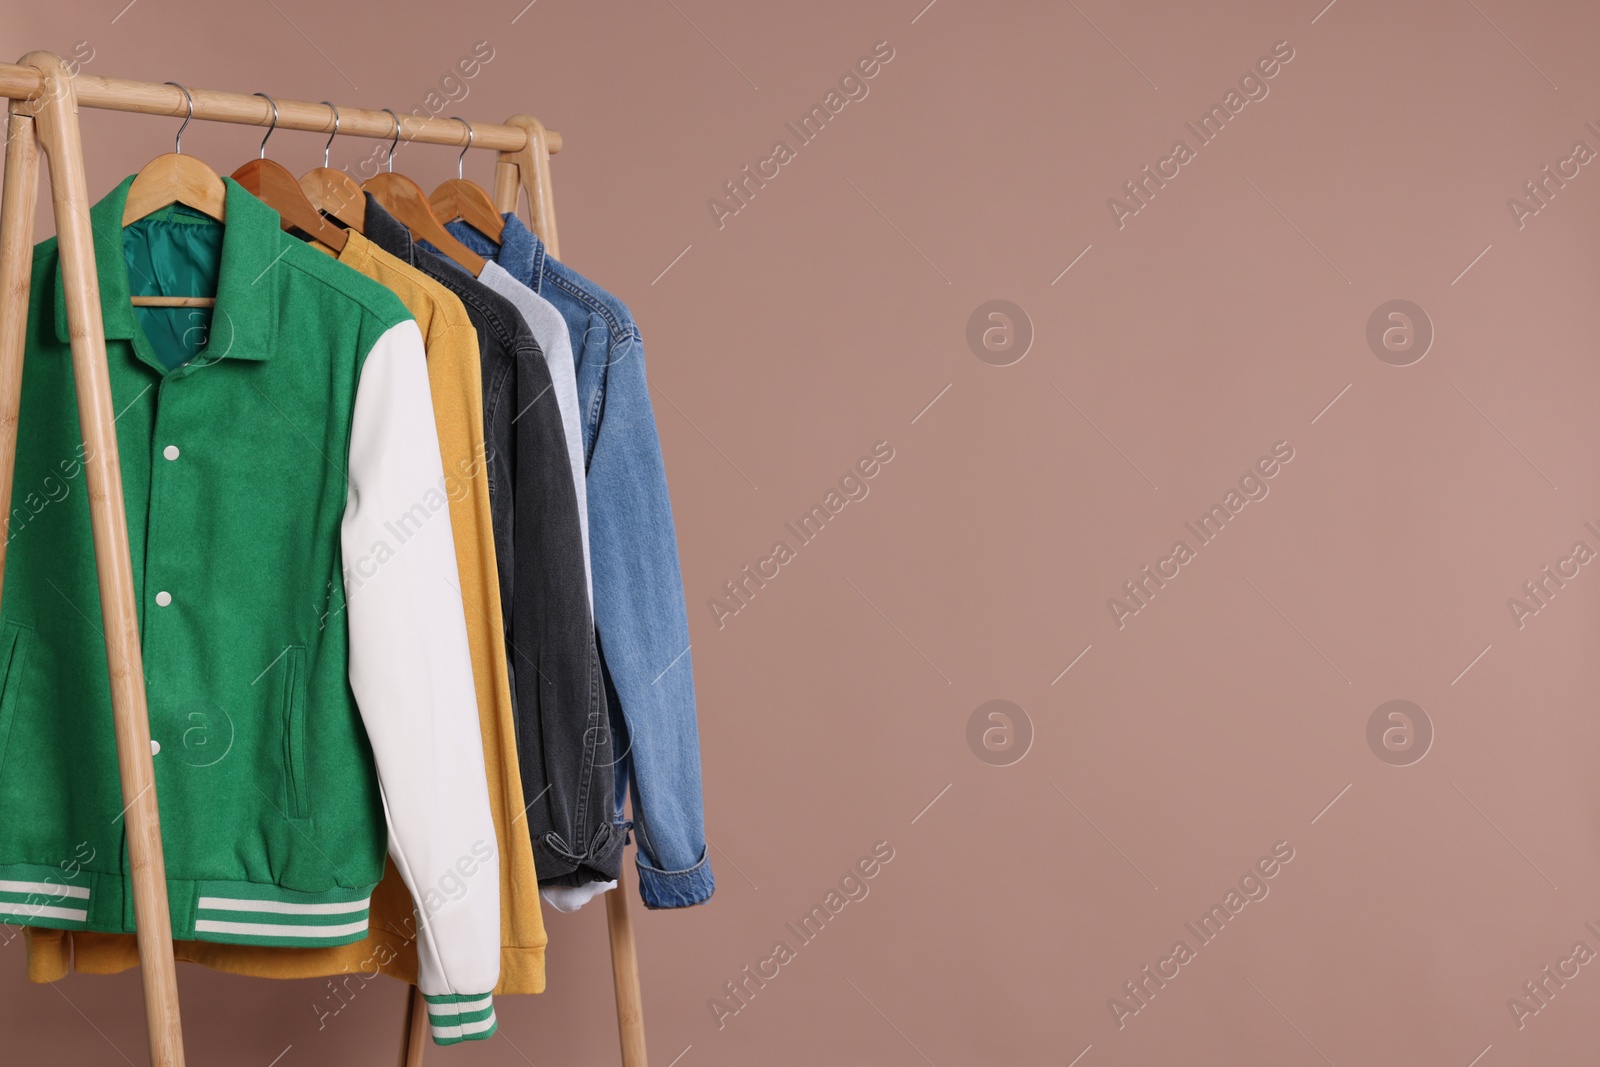 Photo of Rack with stylish clothes on wooden hangers against beige background, space for text